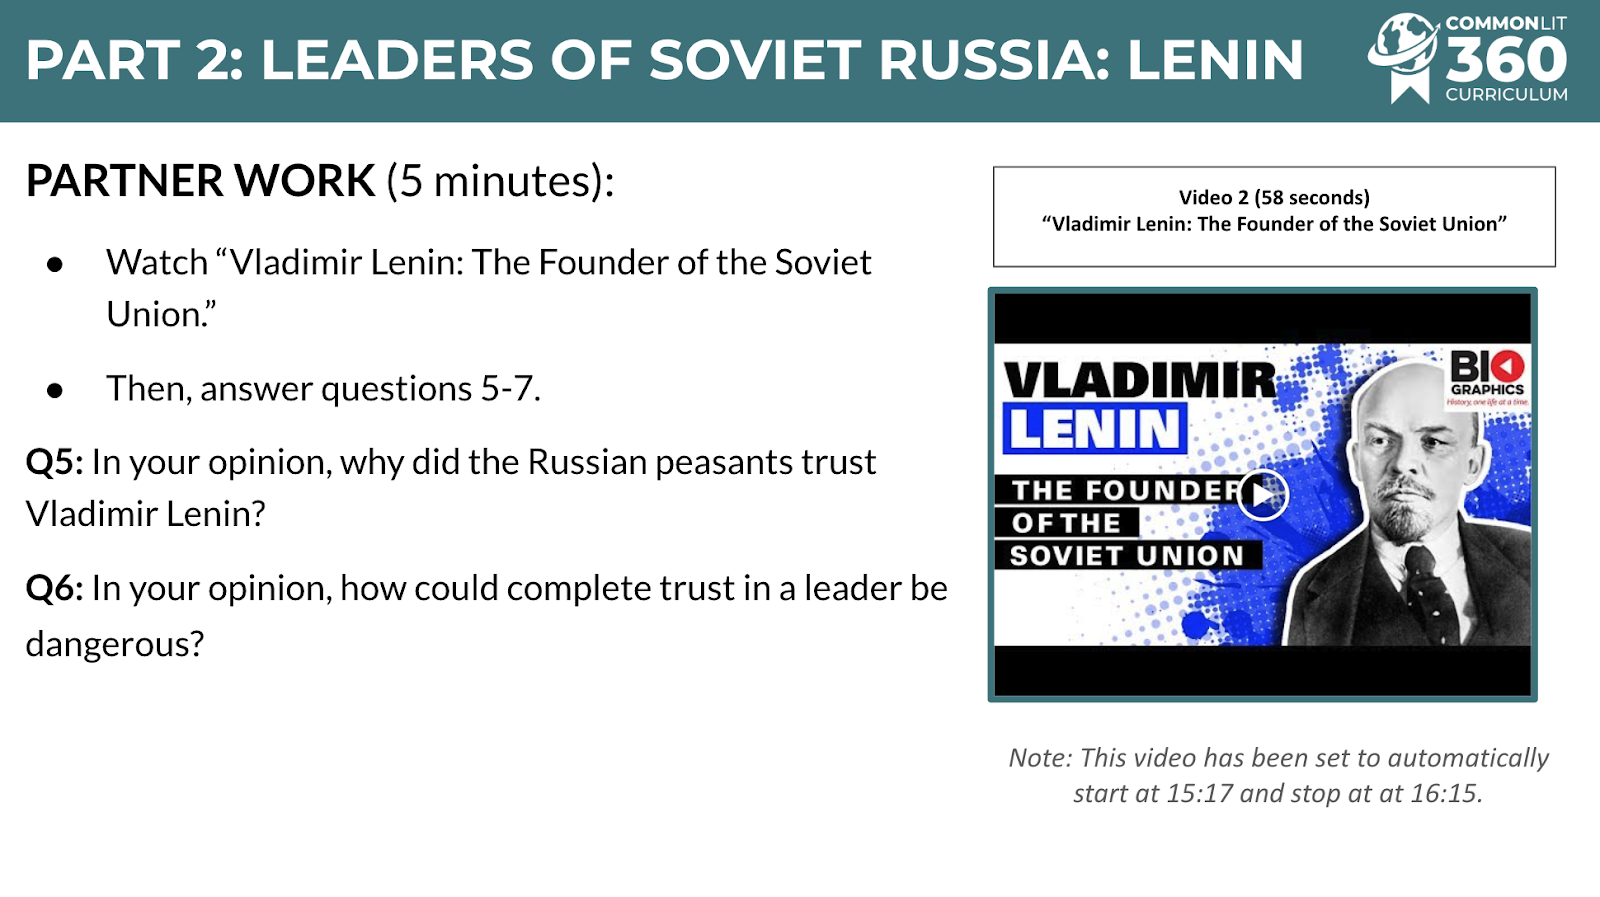 Lesson on Leaders of the Russian Revolution with video of Vladimir Lenin